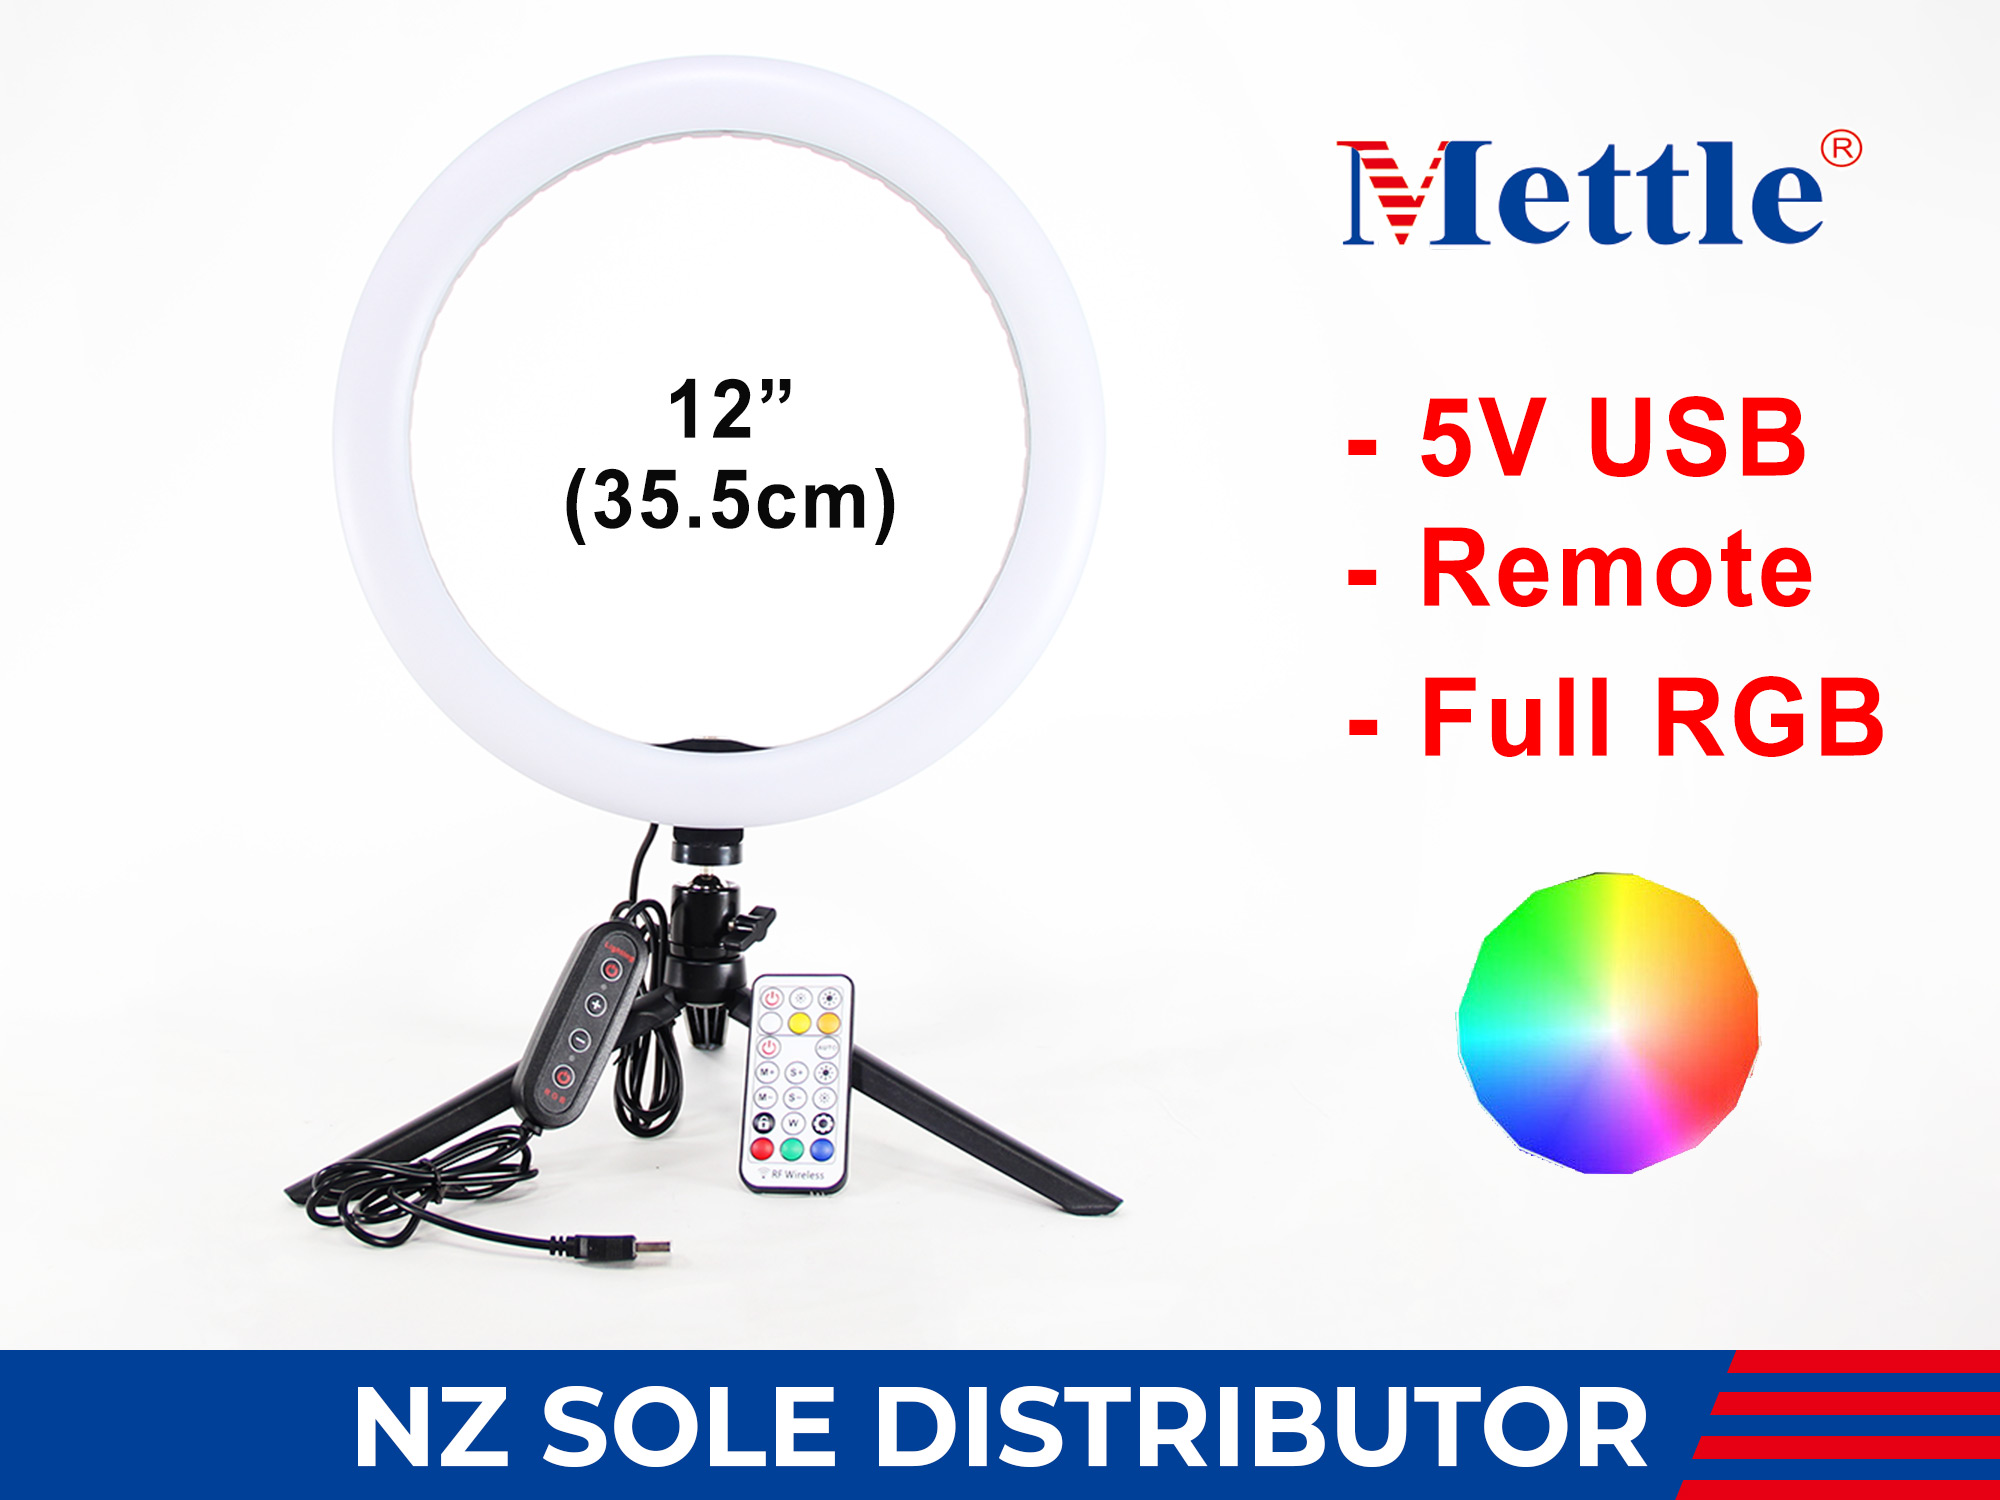 Mettle RGB LED 12" ring light + remote Tripod and flexible phone holder